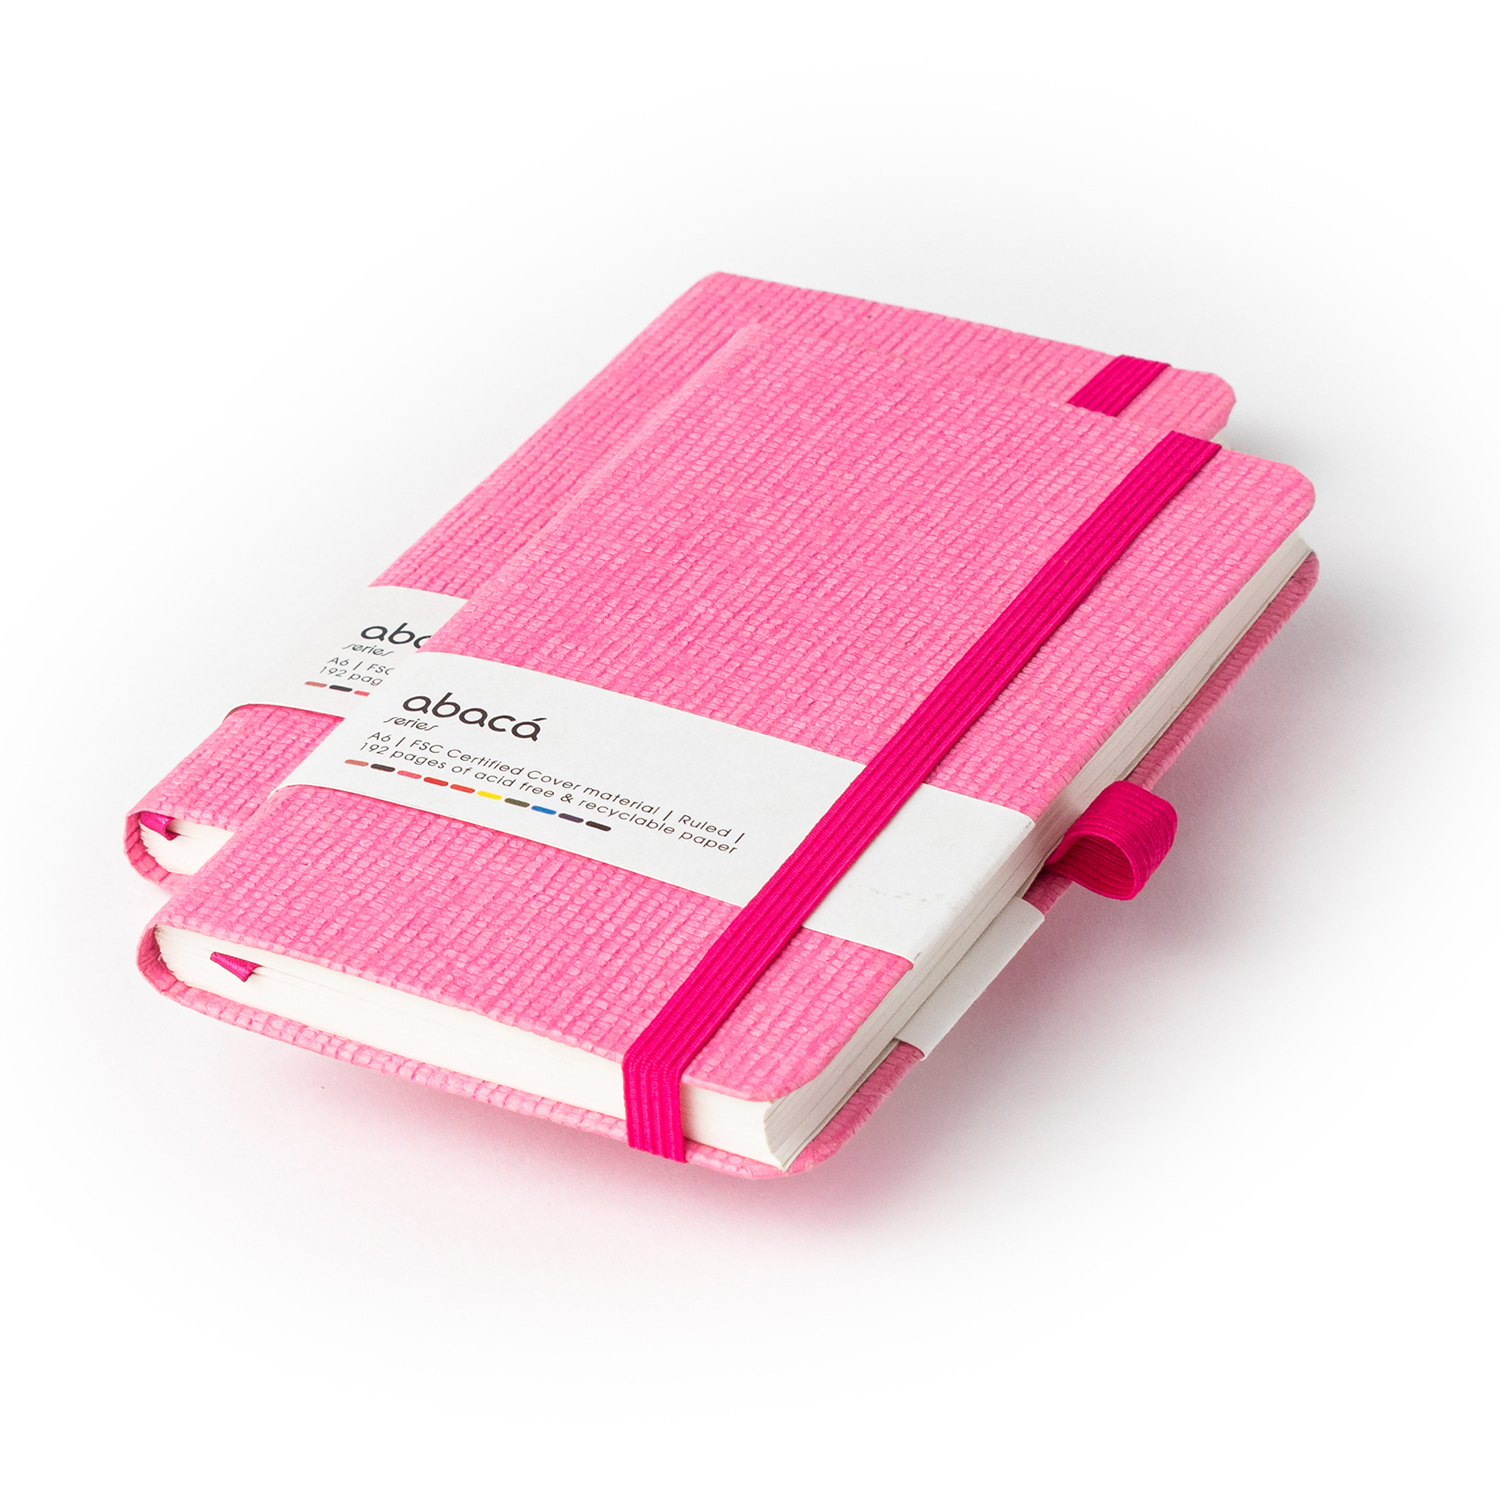 Comma Abaca - A6 Size - Hard Bound Notebook (Pink and Pink)